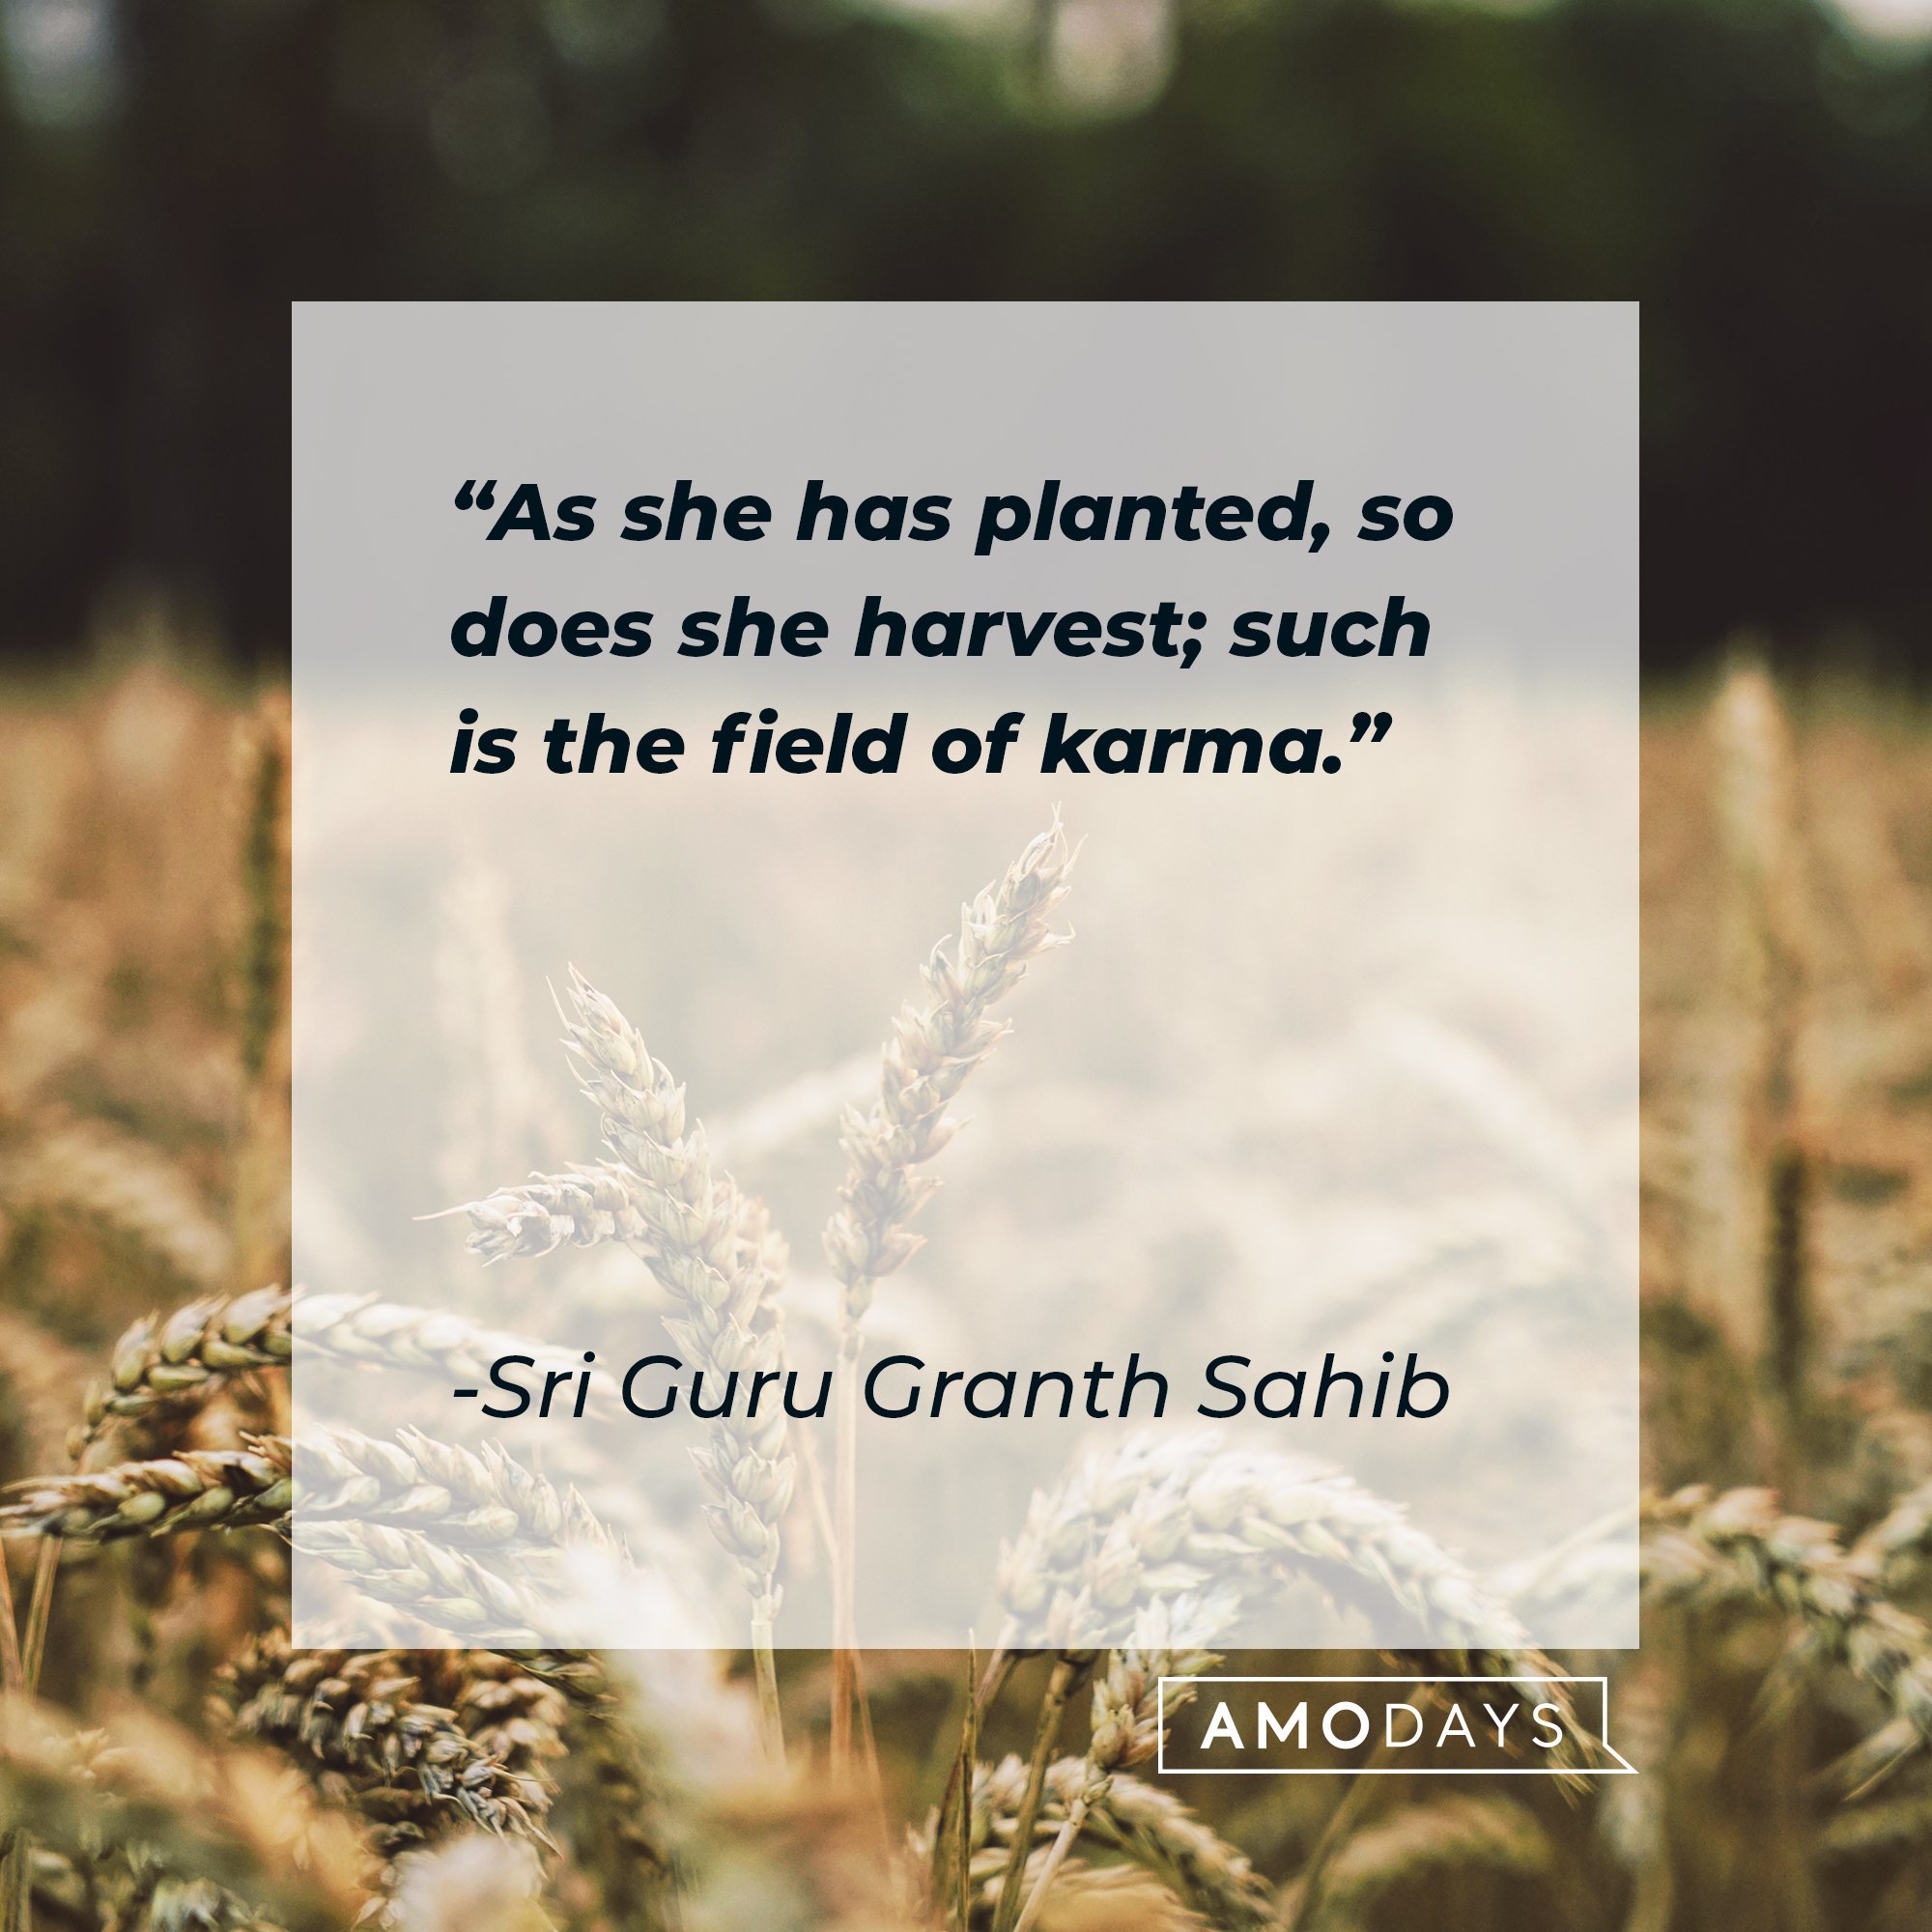 Sri Guru Granth Sahib's quote: “As she has planted, so does she harvest; such is the field of karma.” | Image: AmoDays